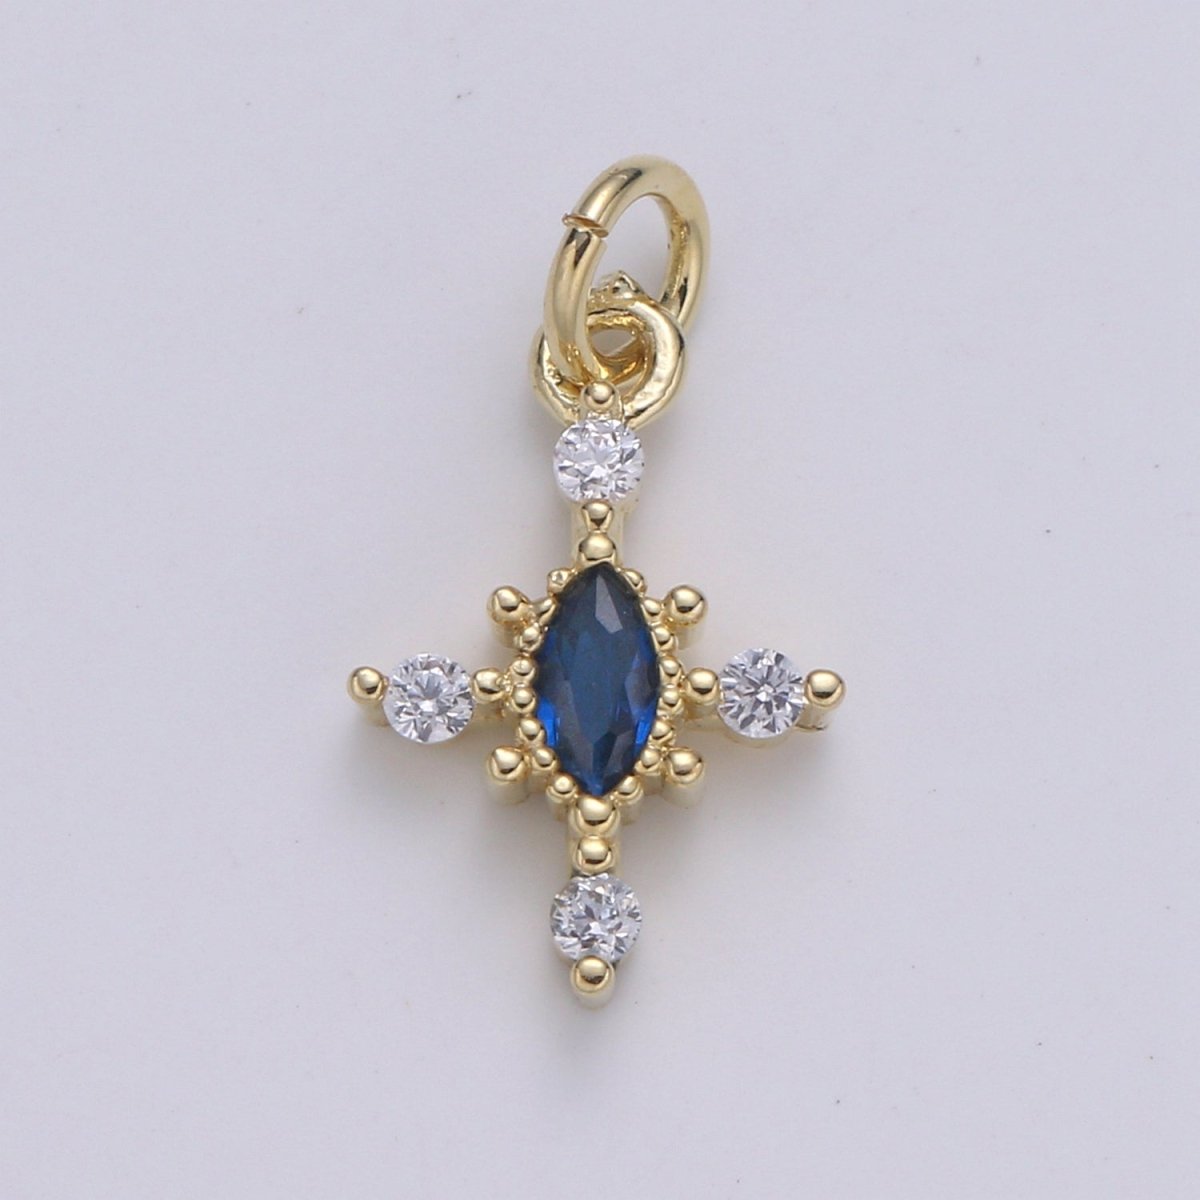 Mini Cross Charm Micro Pave Eye 24K Gold Filled Cross Charm, Cubic Zirconia Cluster Charm for Necklace Earring Bracelet Jewelry Making E-233-E-236 - DLUXCA